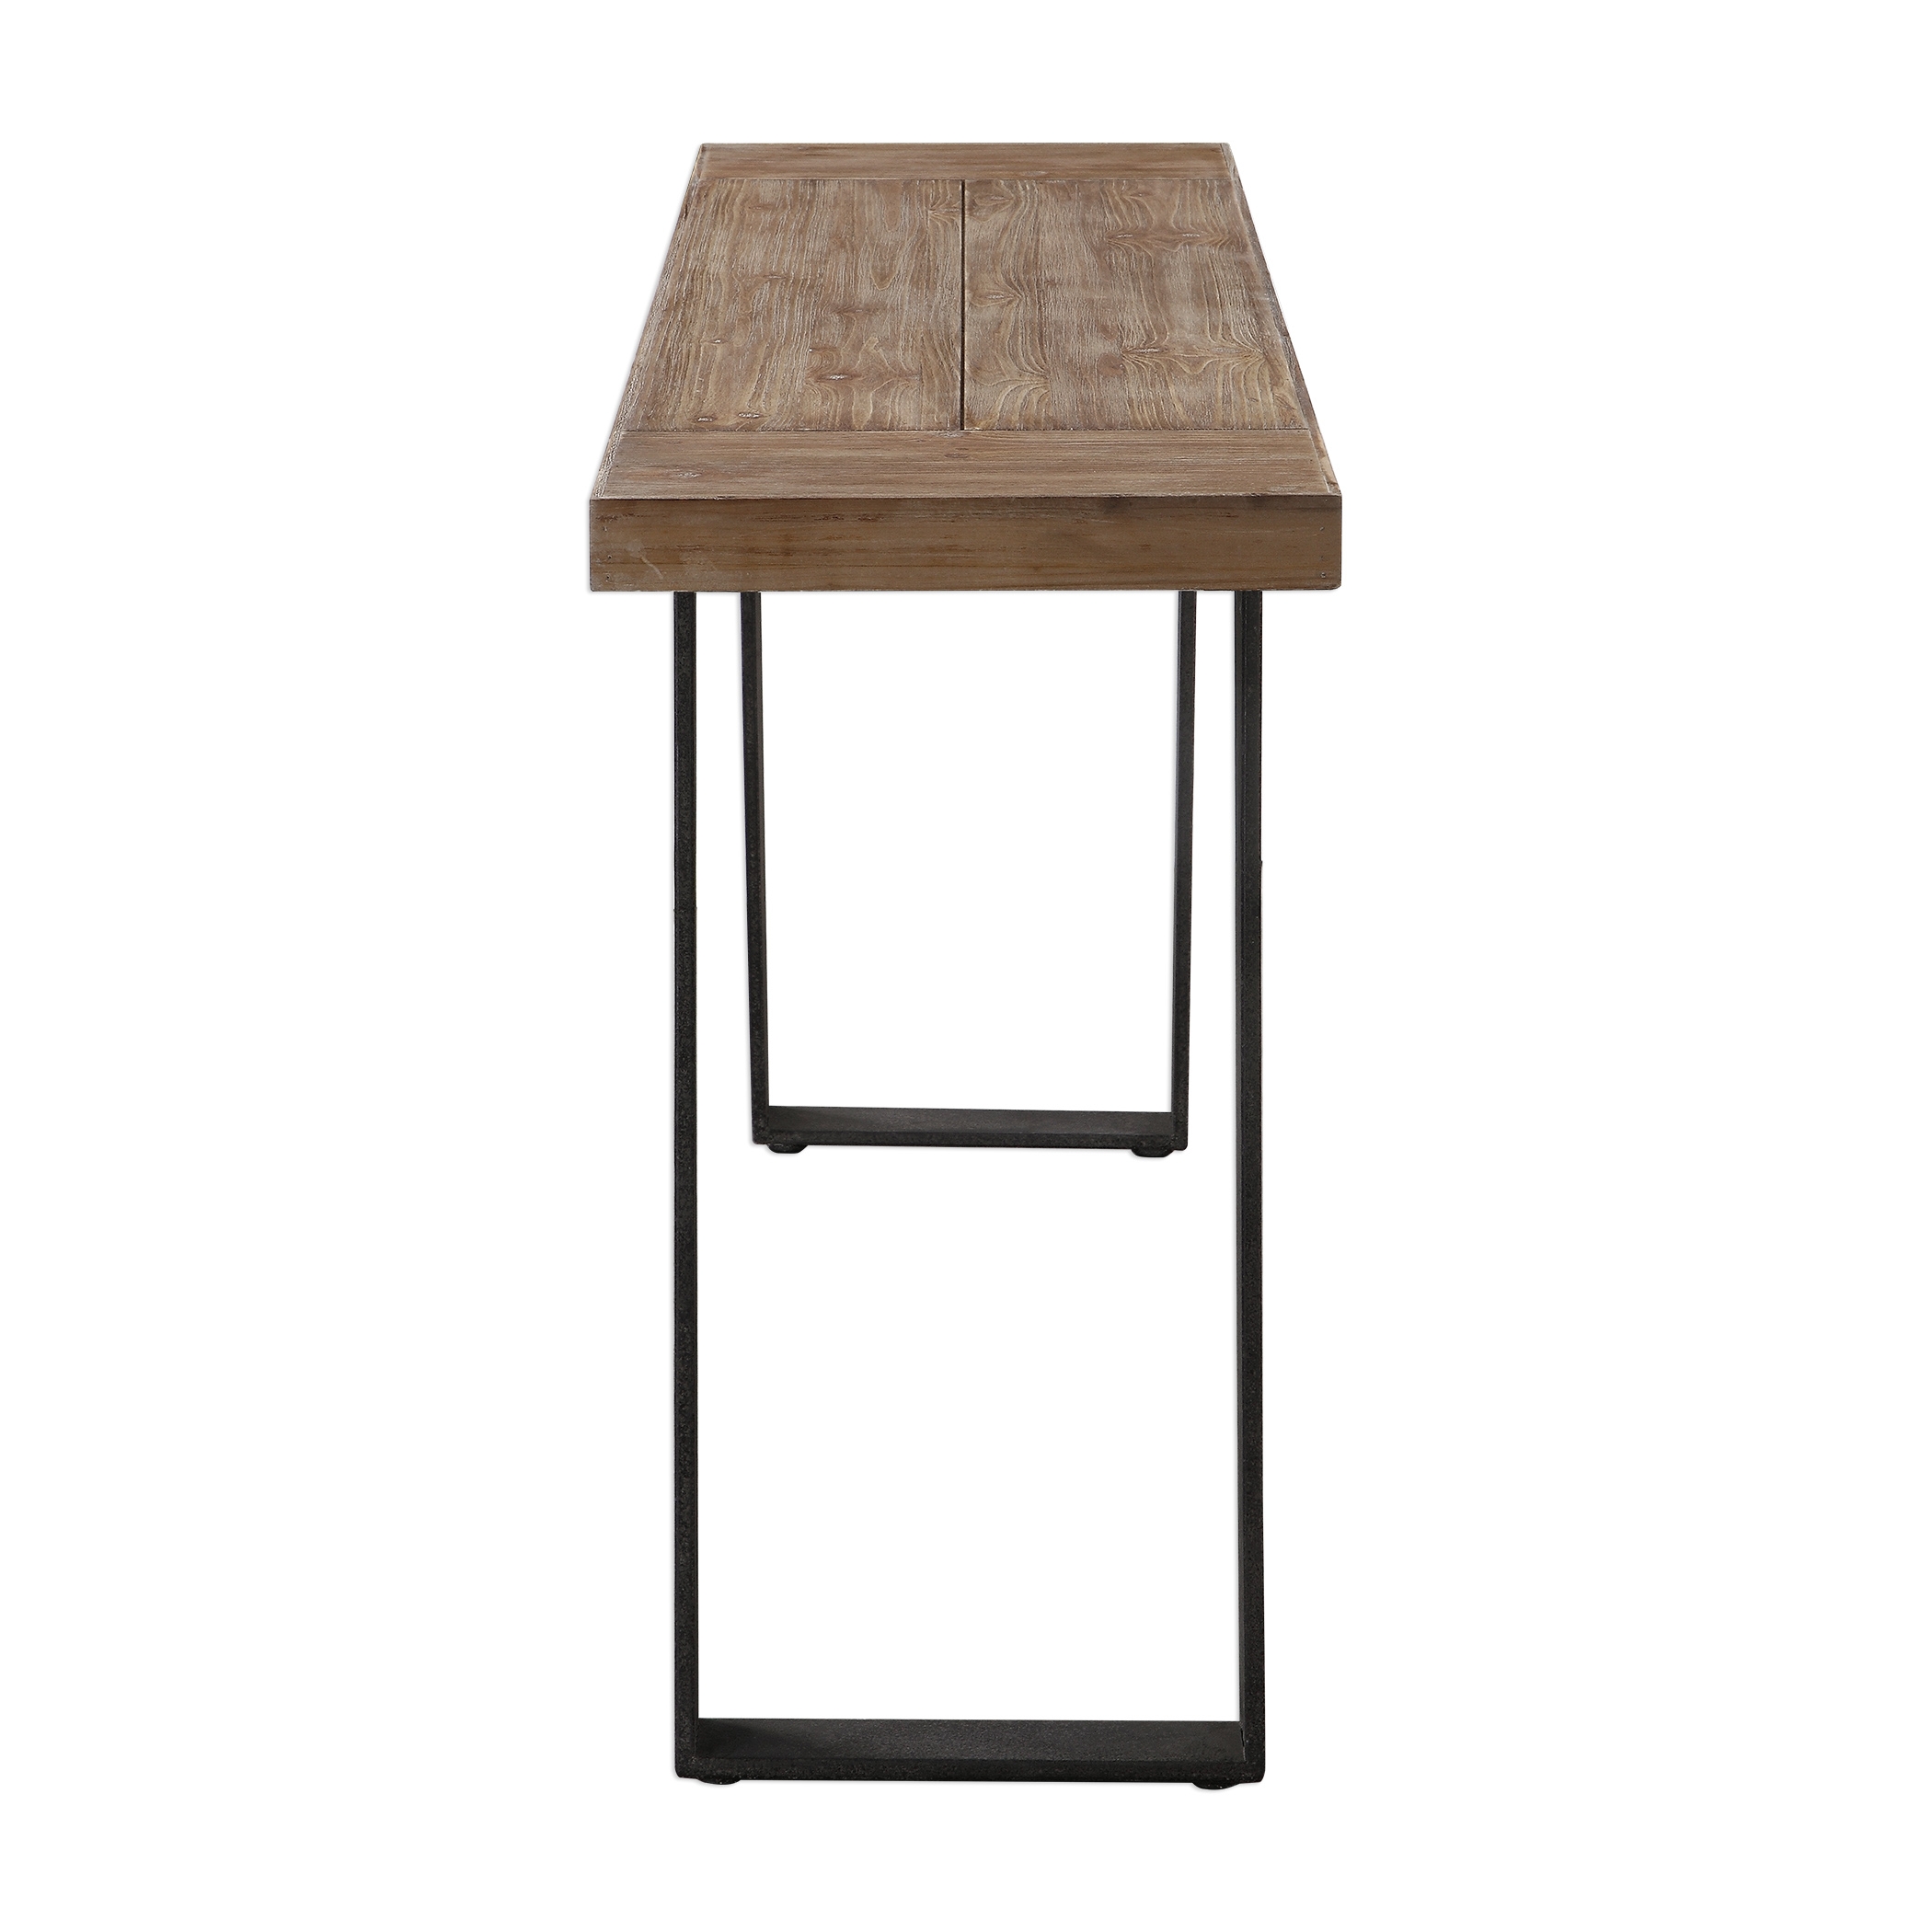 Freddy Weathered Console Table - Image 4